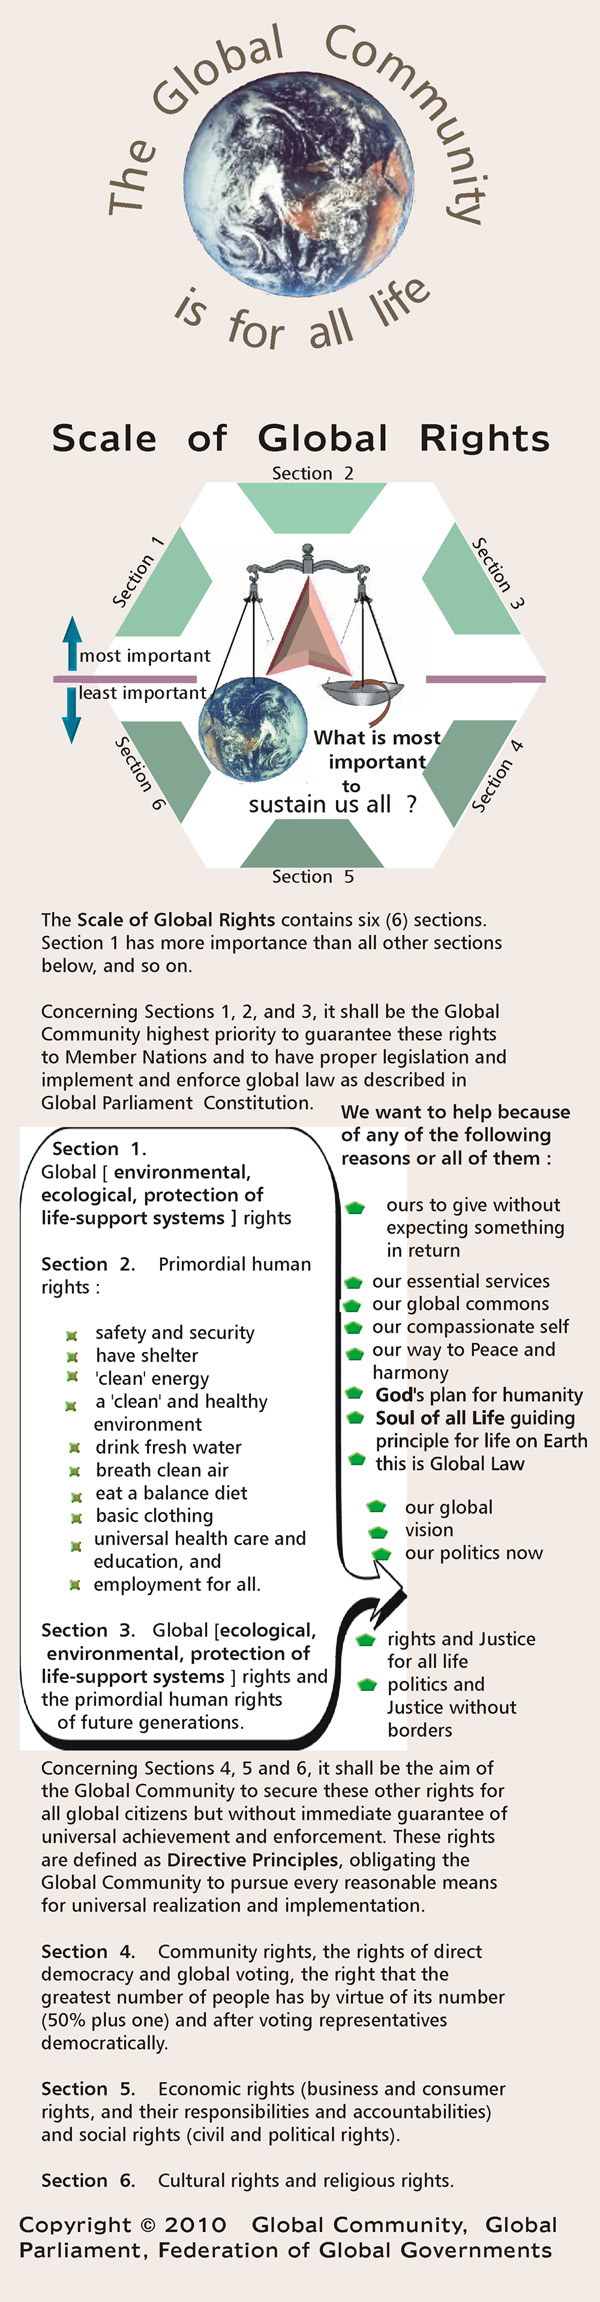 Definition of the Scale of Global Rights